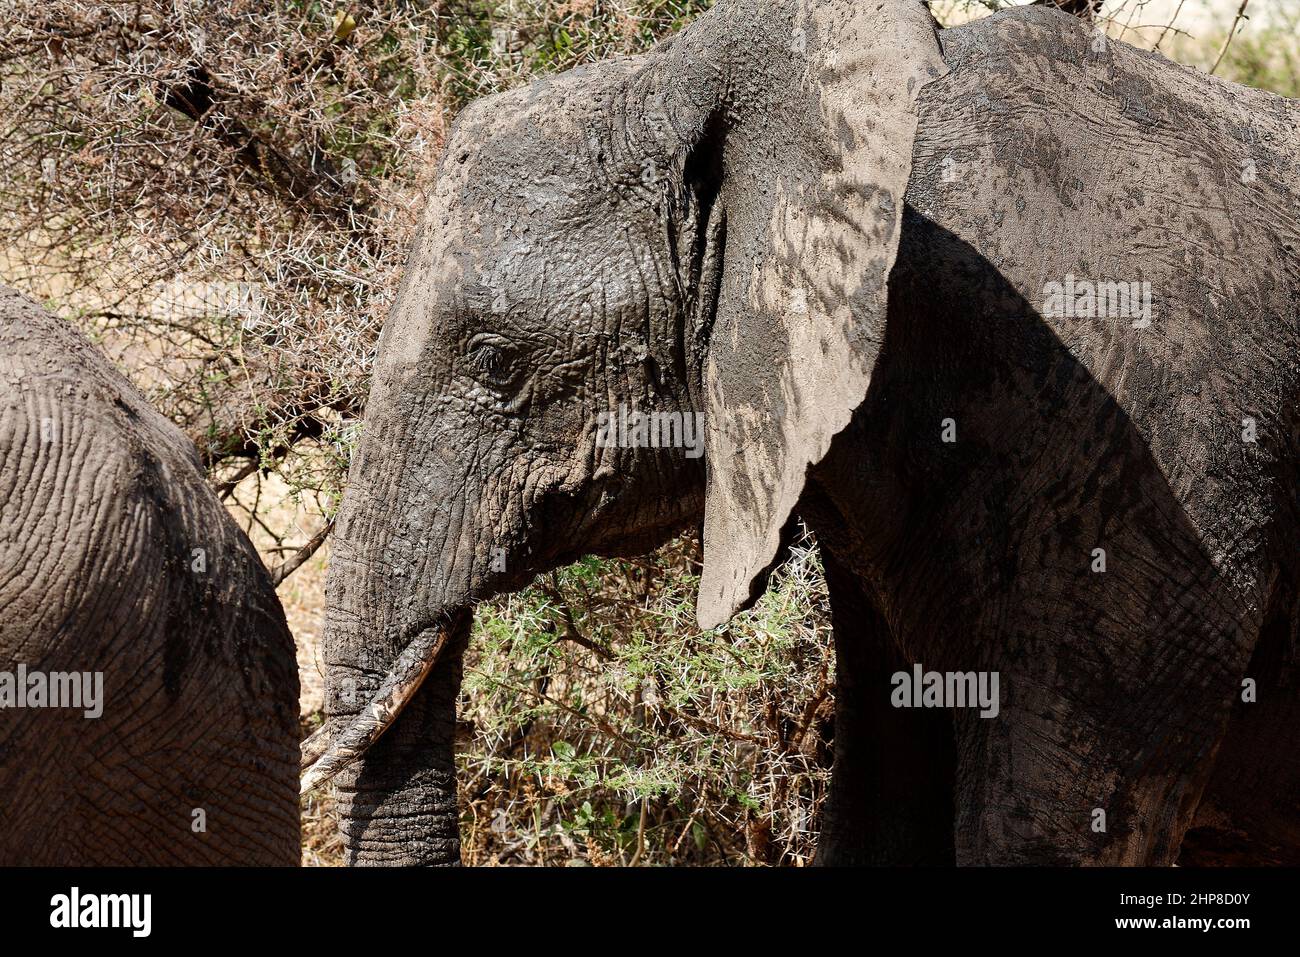 African elephant, Loxodanta africana, herbivores, African elephant; close-up; caked with mud; texture; head; large ear; Stock Photo